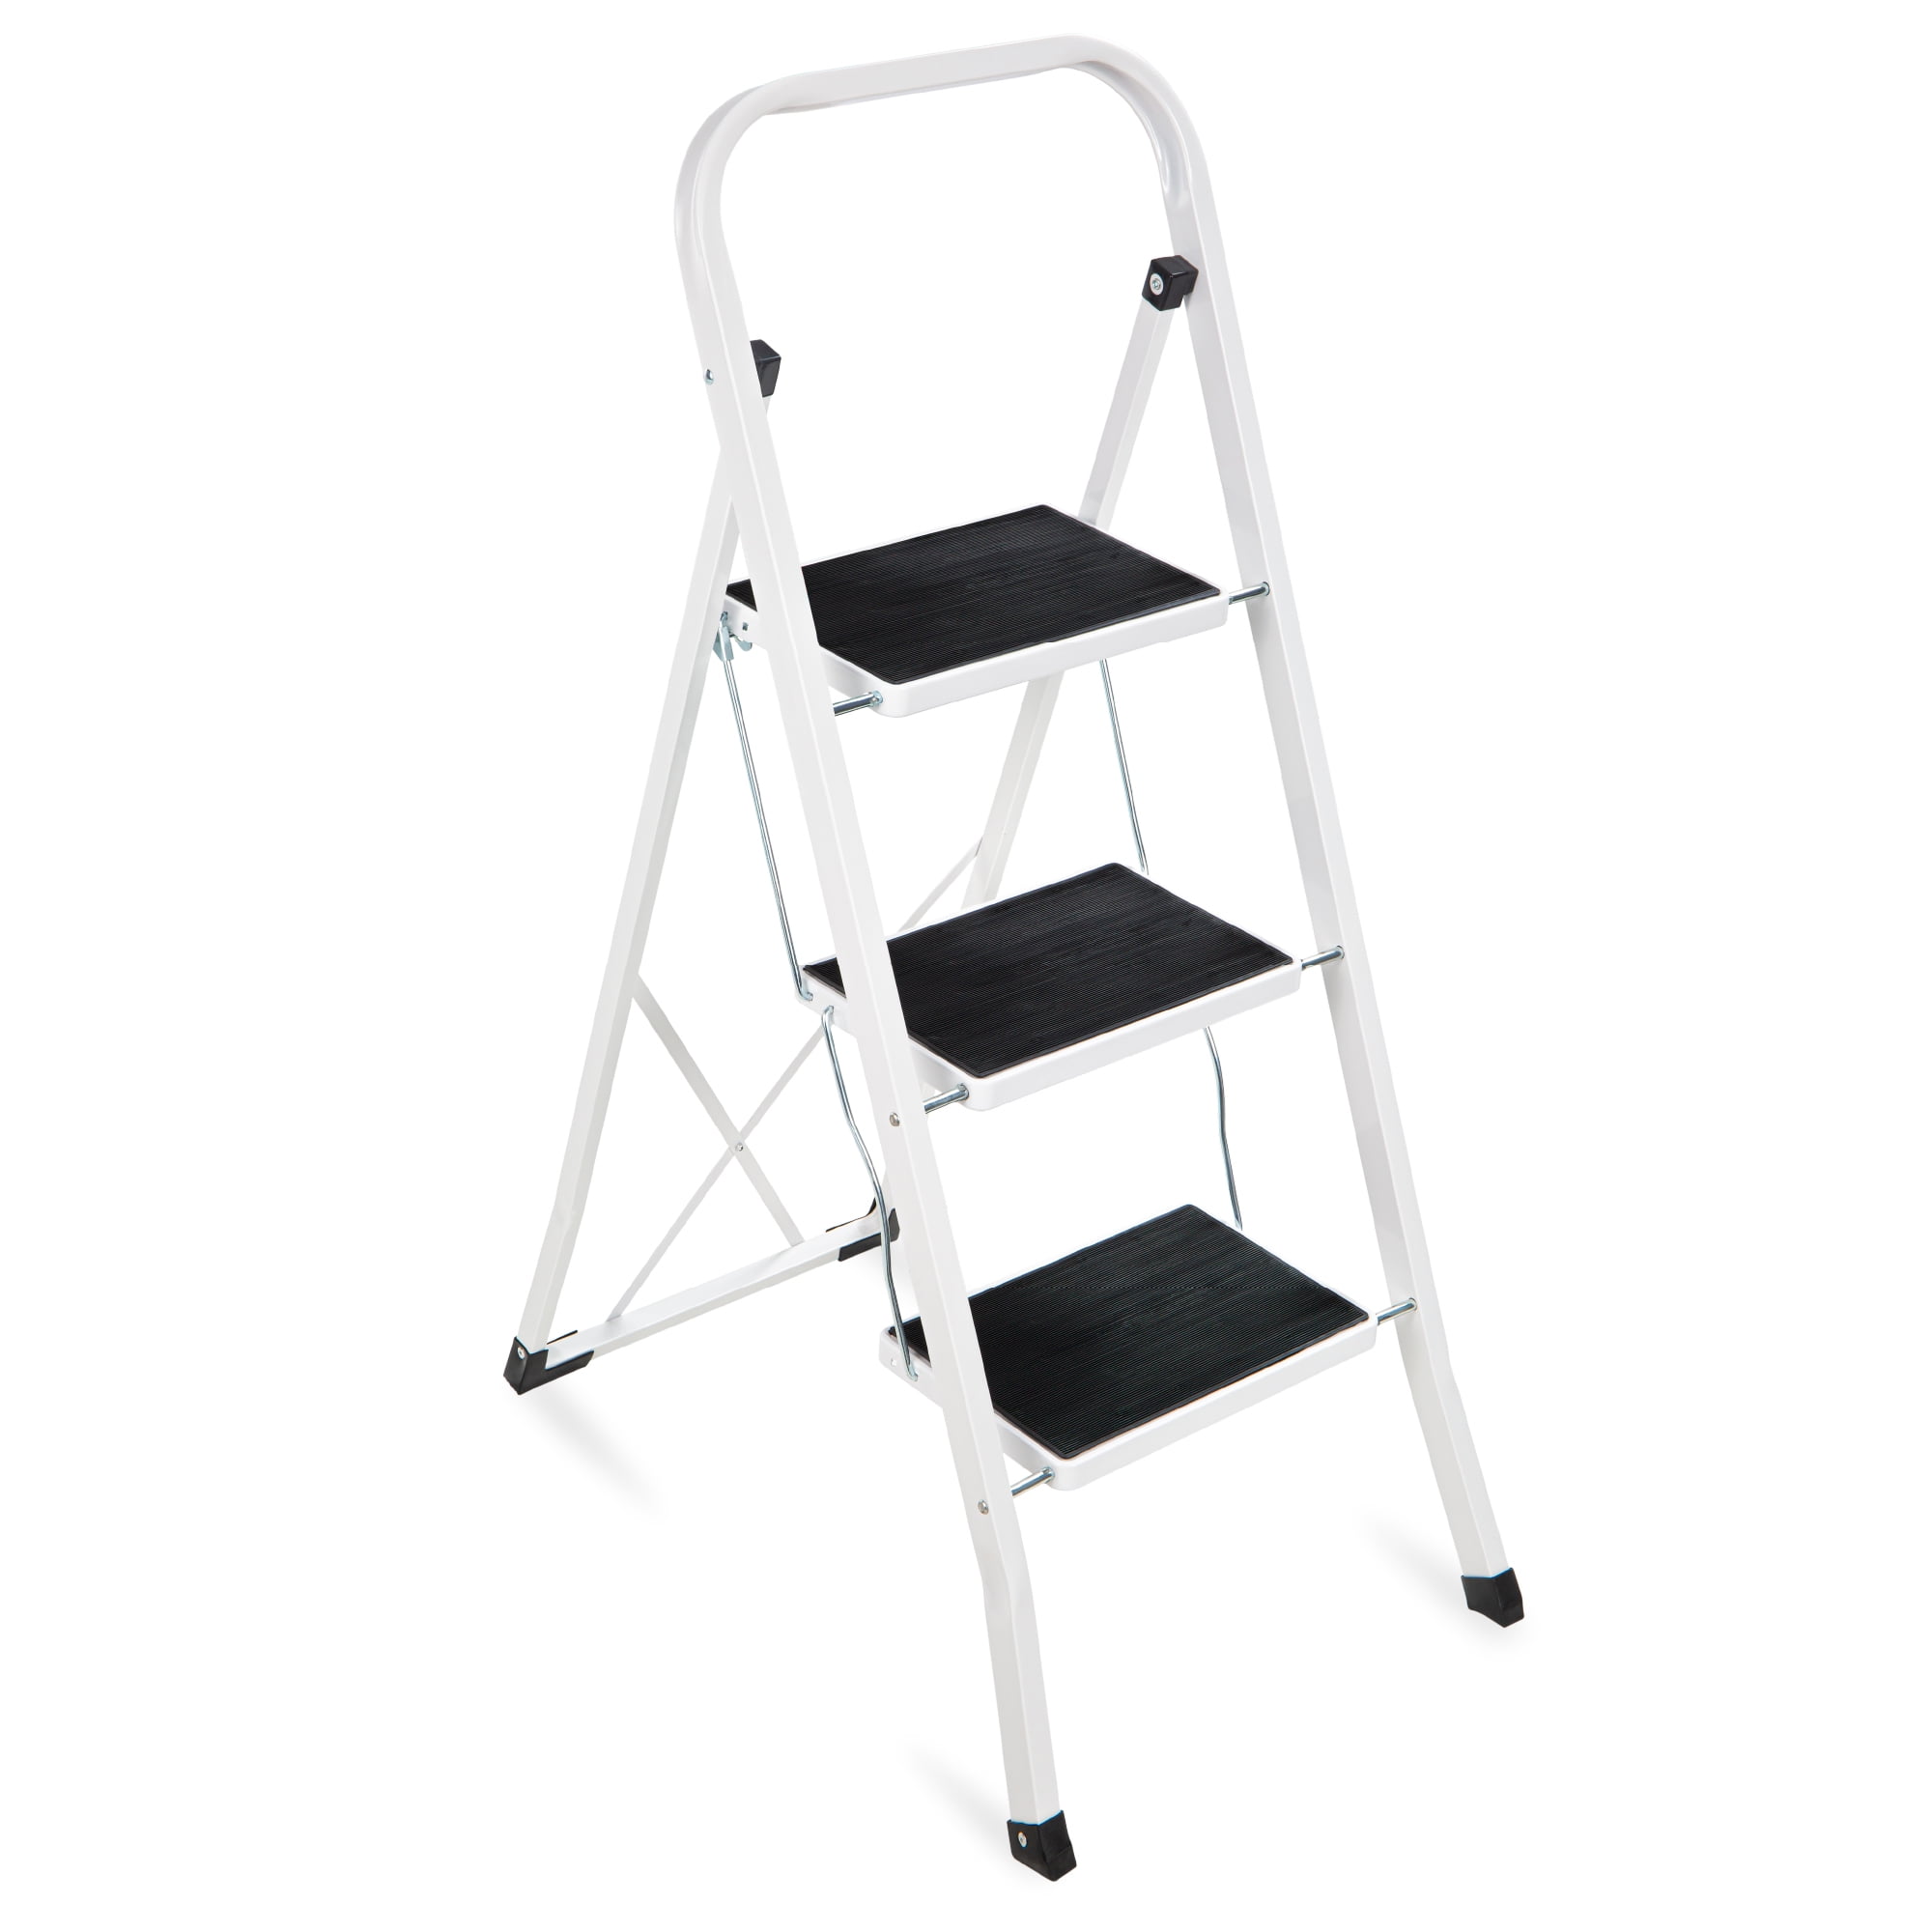 Lightweight Portable Stool Stairs 330lbs Load Sturdy Steel Foldable Ladders Folding Step Stool w/Non-Slip Rubber Feet Multi-use Ladder Stand for Household and Office 5 Step Ladder